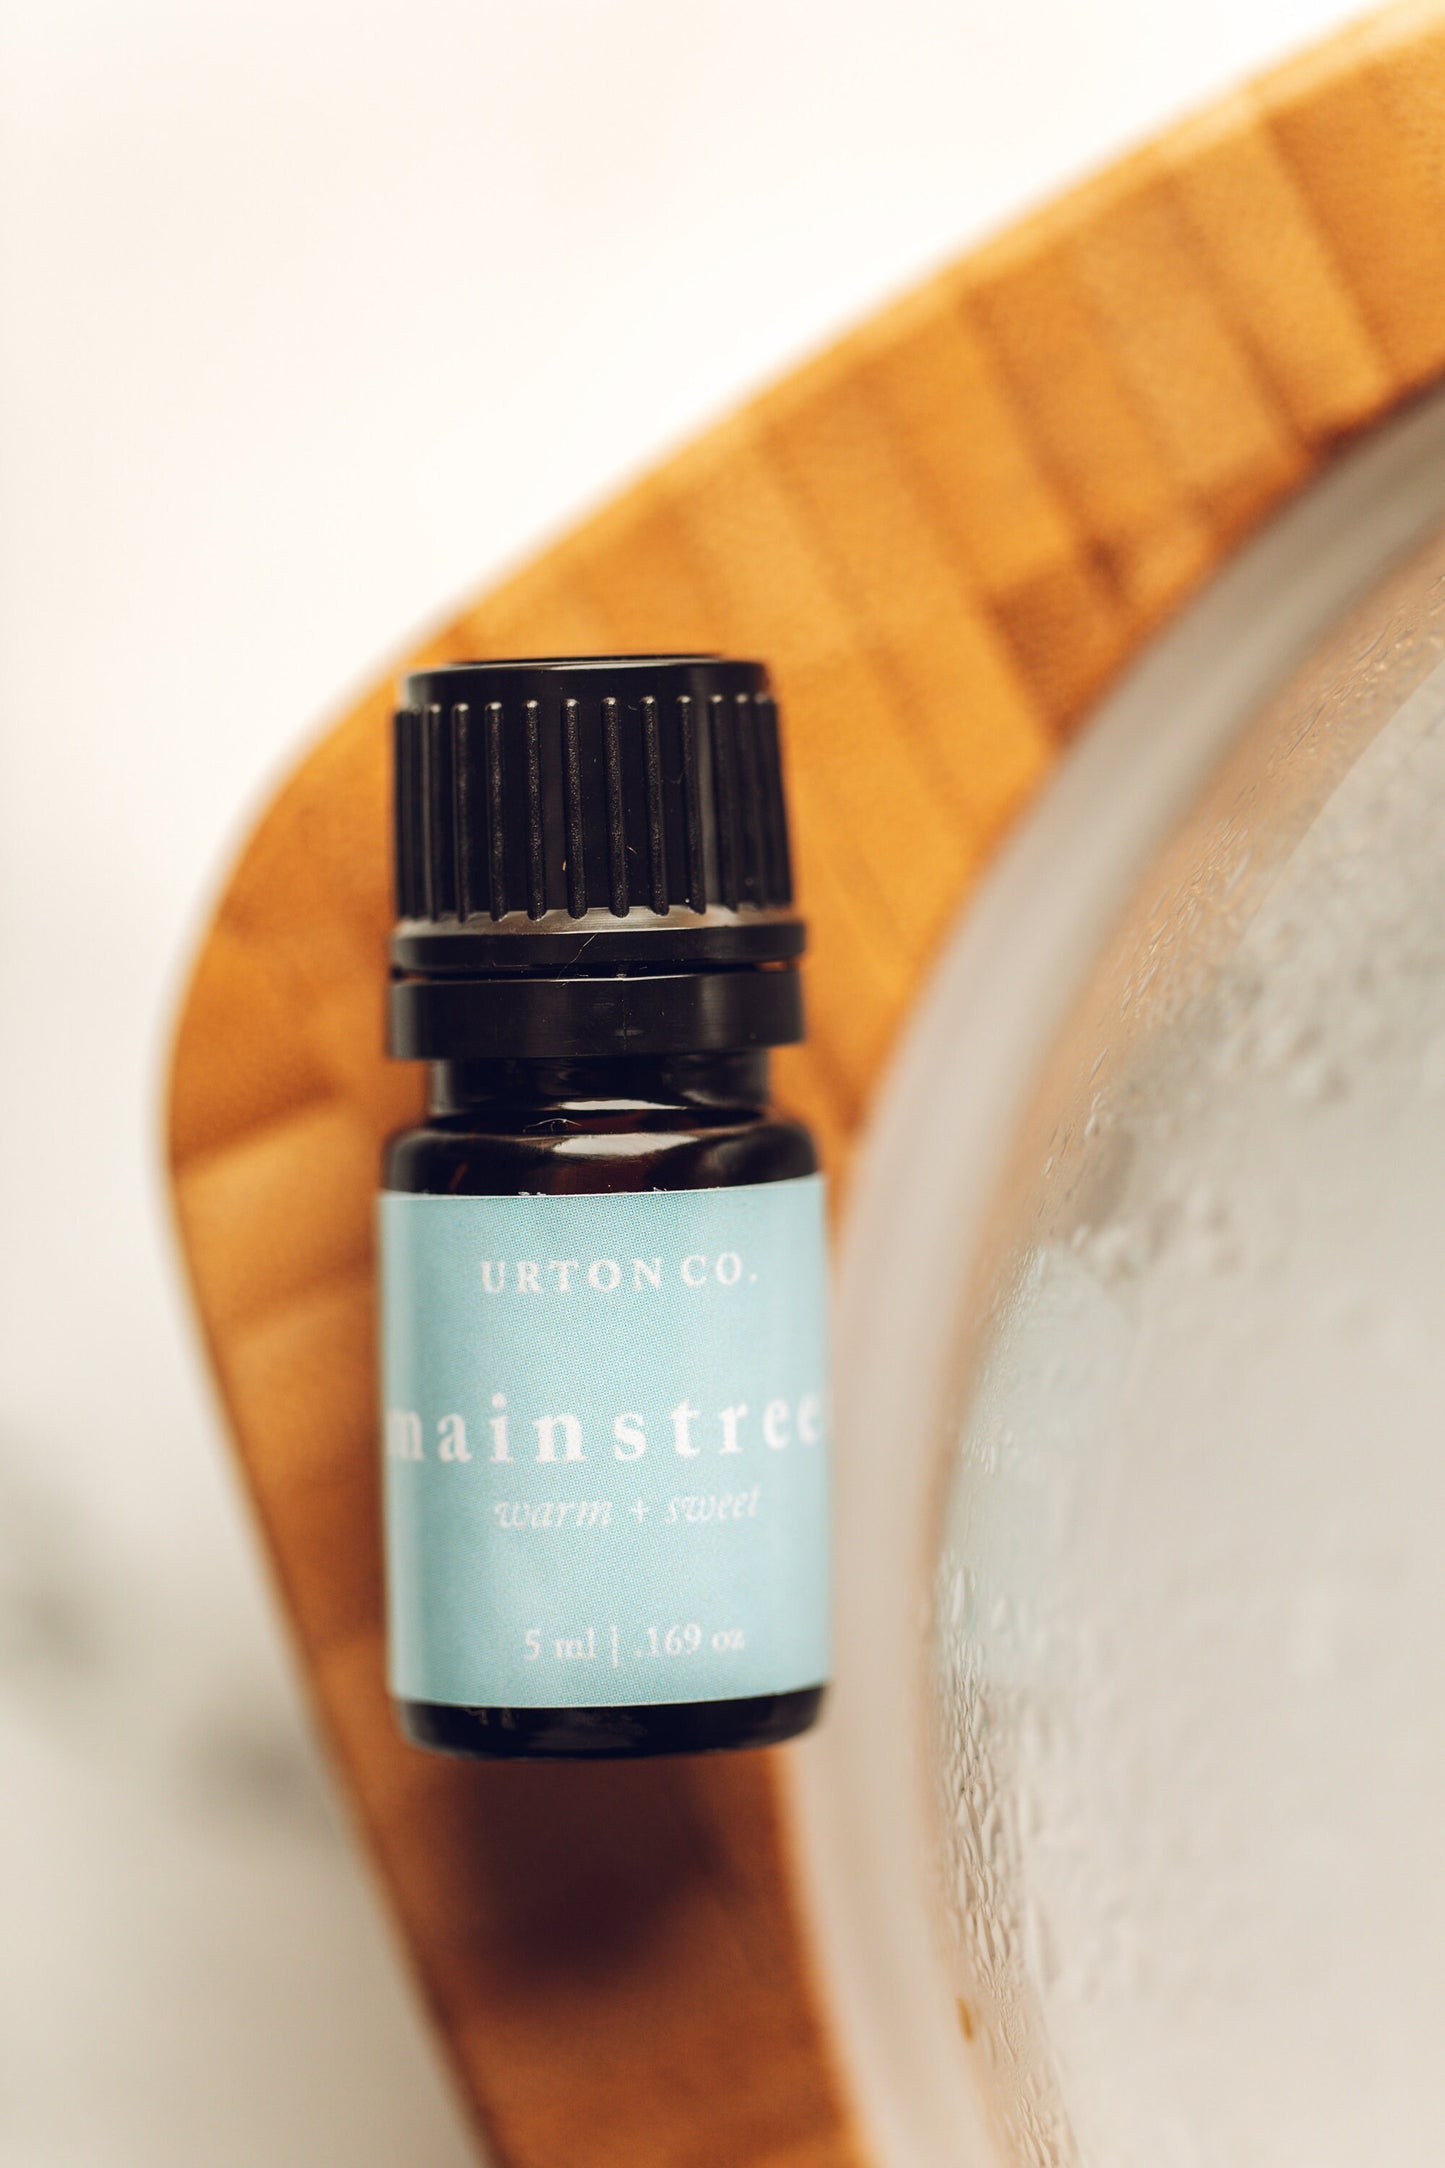 Main Street USA Magic: Disney-Inspired Roll-On Essential Oil Blend - Enchanting Aromatherapy on the Go! | Disney Essential Oil Blend | Gift